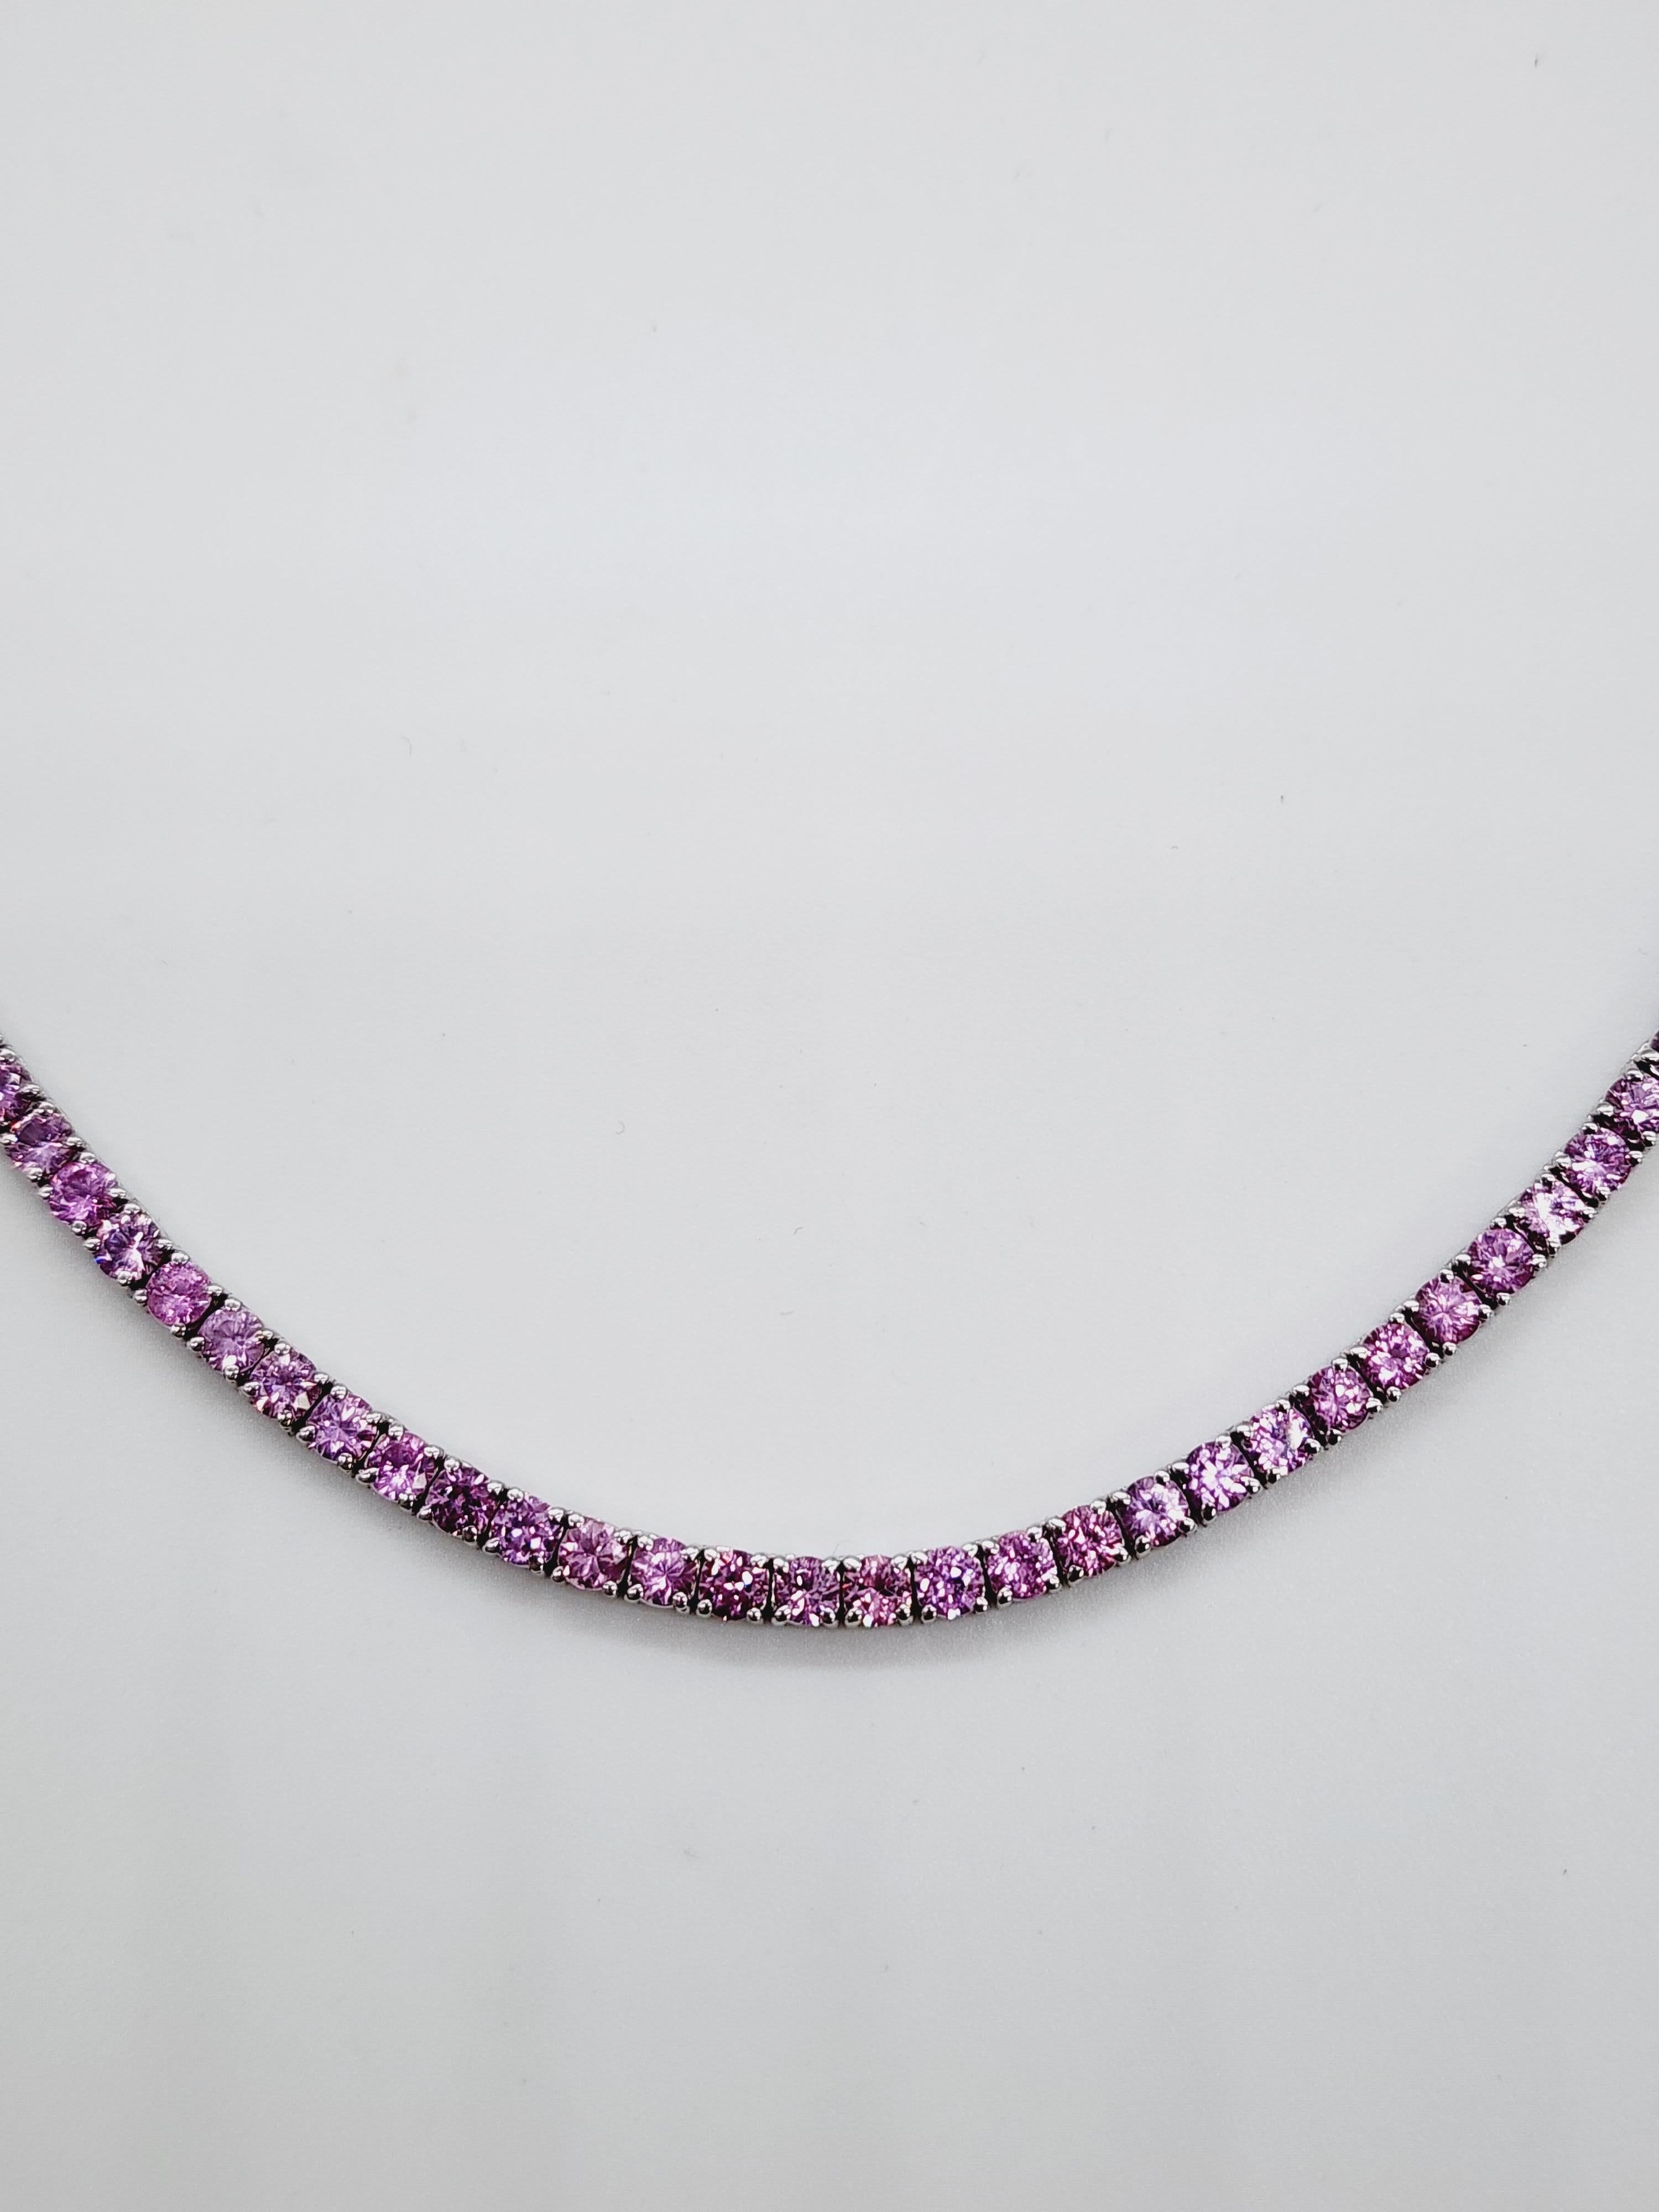 18.90 Carats Pink Sapphire Tennis Necklace 14 Karat White Gold 18'' In New Condition For Sale In Great Neck, NY